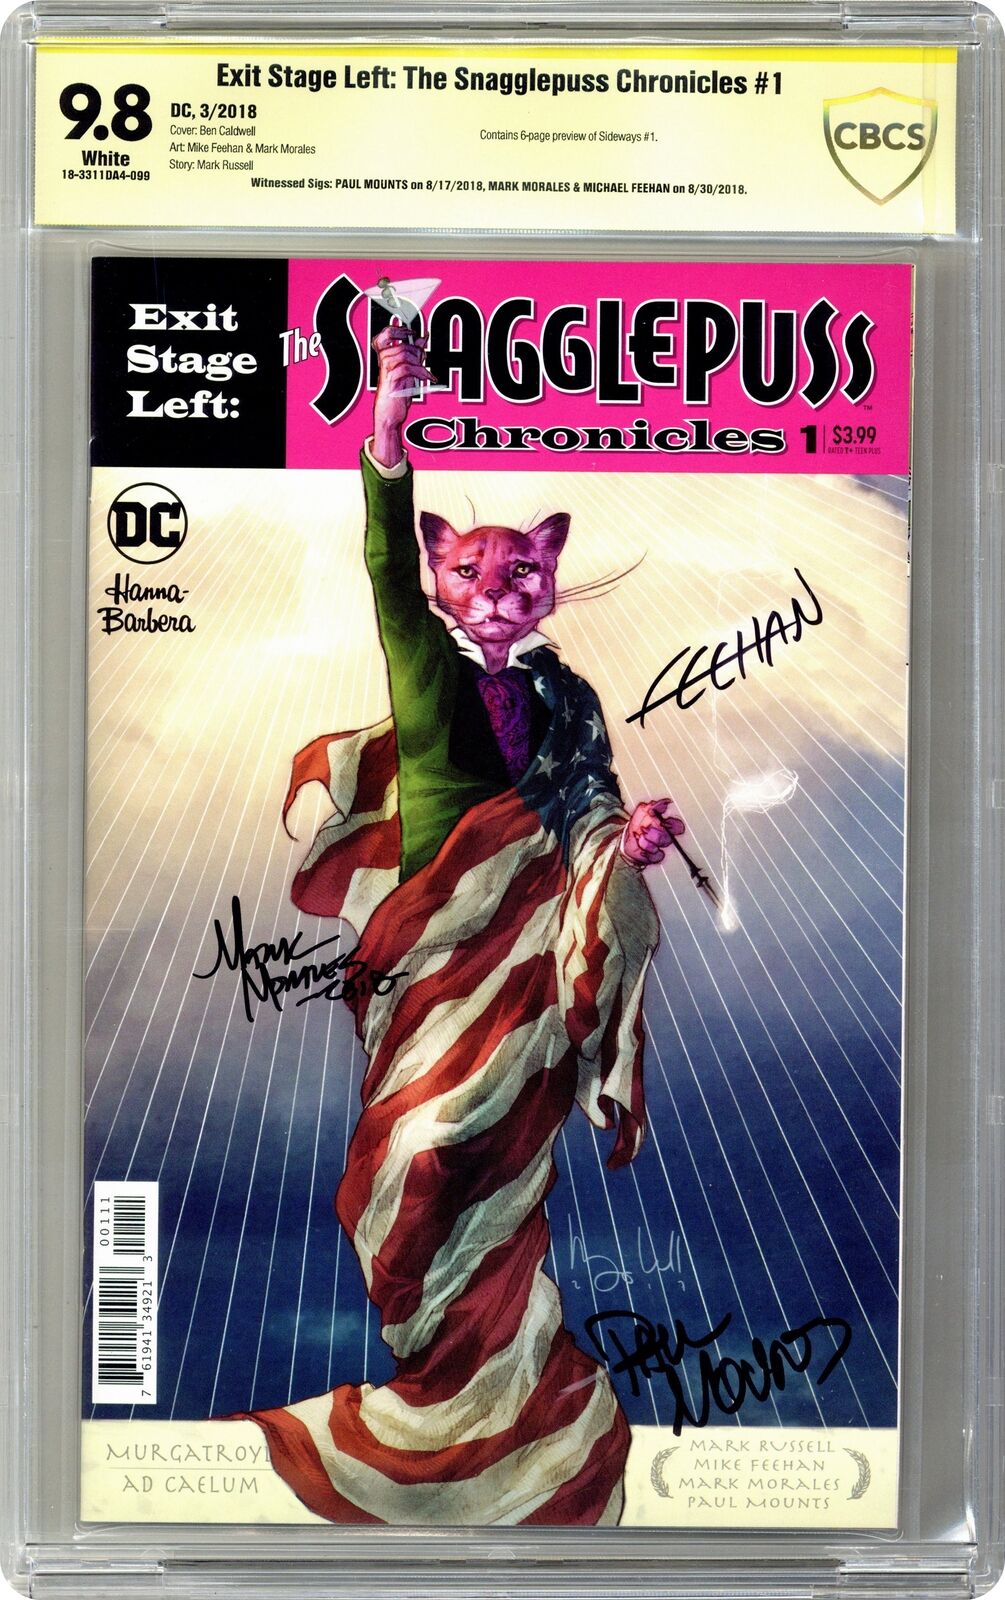 Exit Stage Left The Snagglepuss Chronicles 1A Caldwell CBCS 9.8 SS 2018